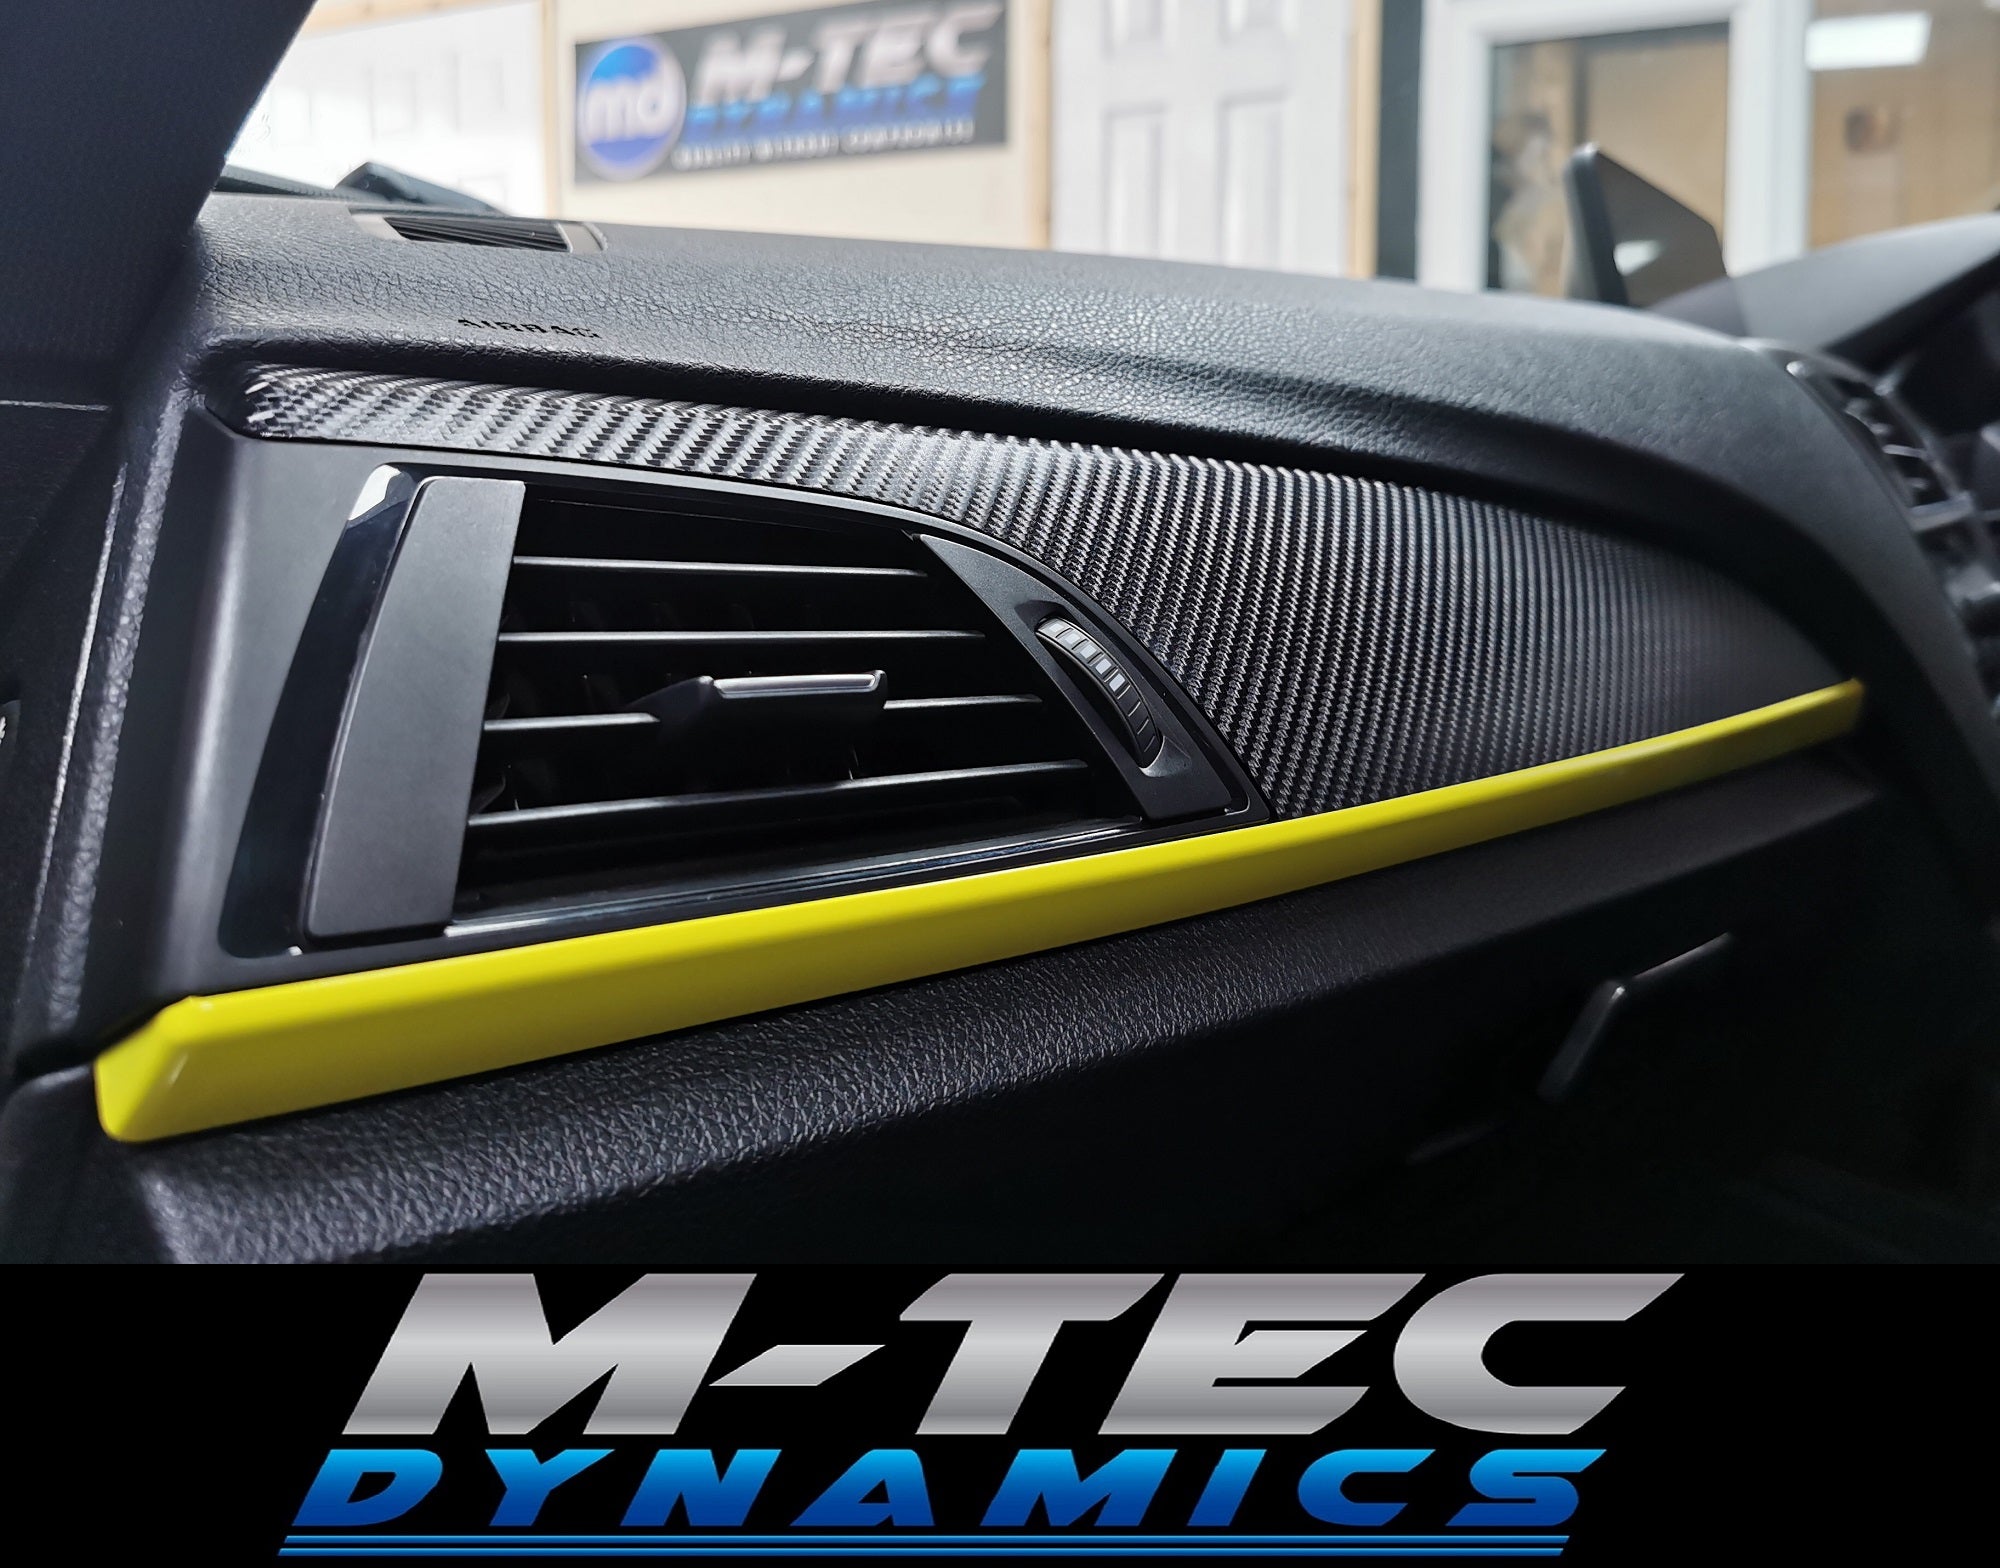 WRAPPING SERVICE - BMW F2X TRIM SET 4D CARBON / YELLOW / CUSTOM ACCENT